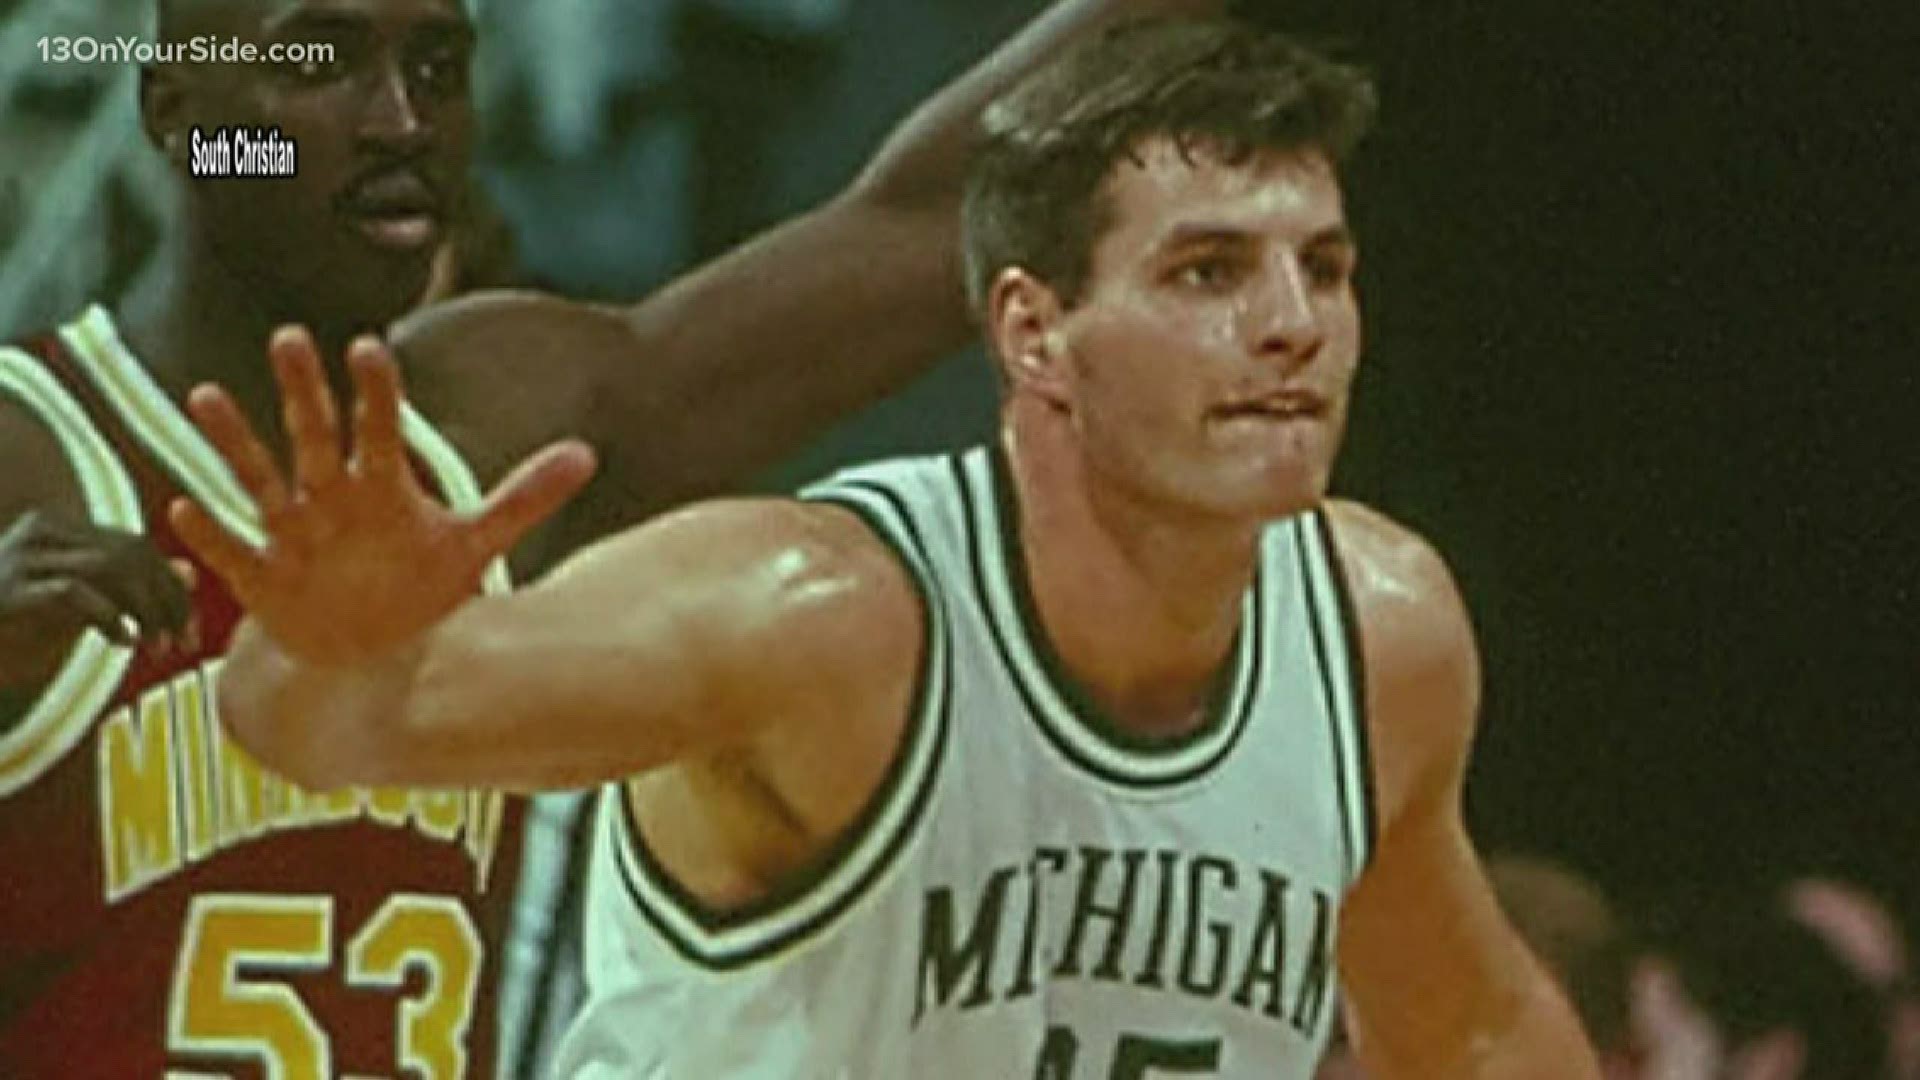 Grand Rapids native and former MSU player Matt Steigenga played two games for the Bulls in 1997. He left with some great stories and amazingly, a championship ring.